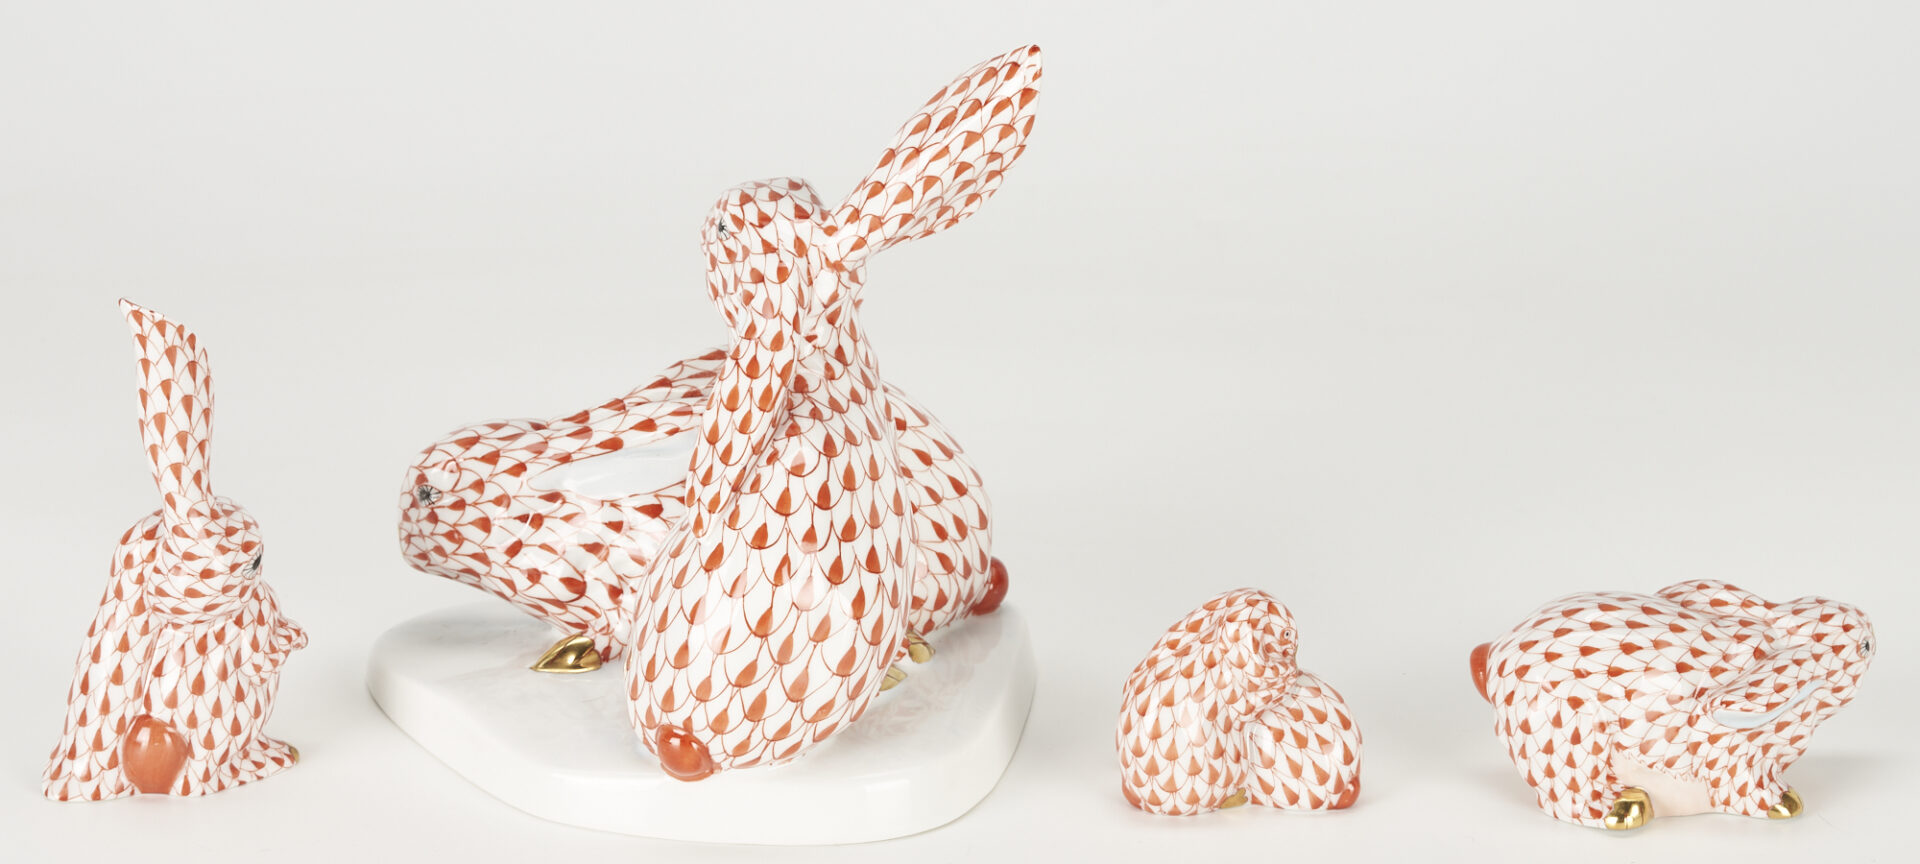 Lot 360: 8 Herend Porcelain Rabbits, Red Fishnet Decoration incl. Bunnies with Corn